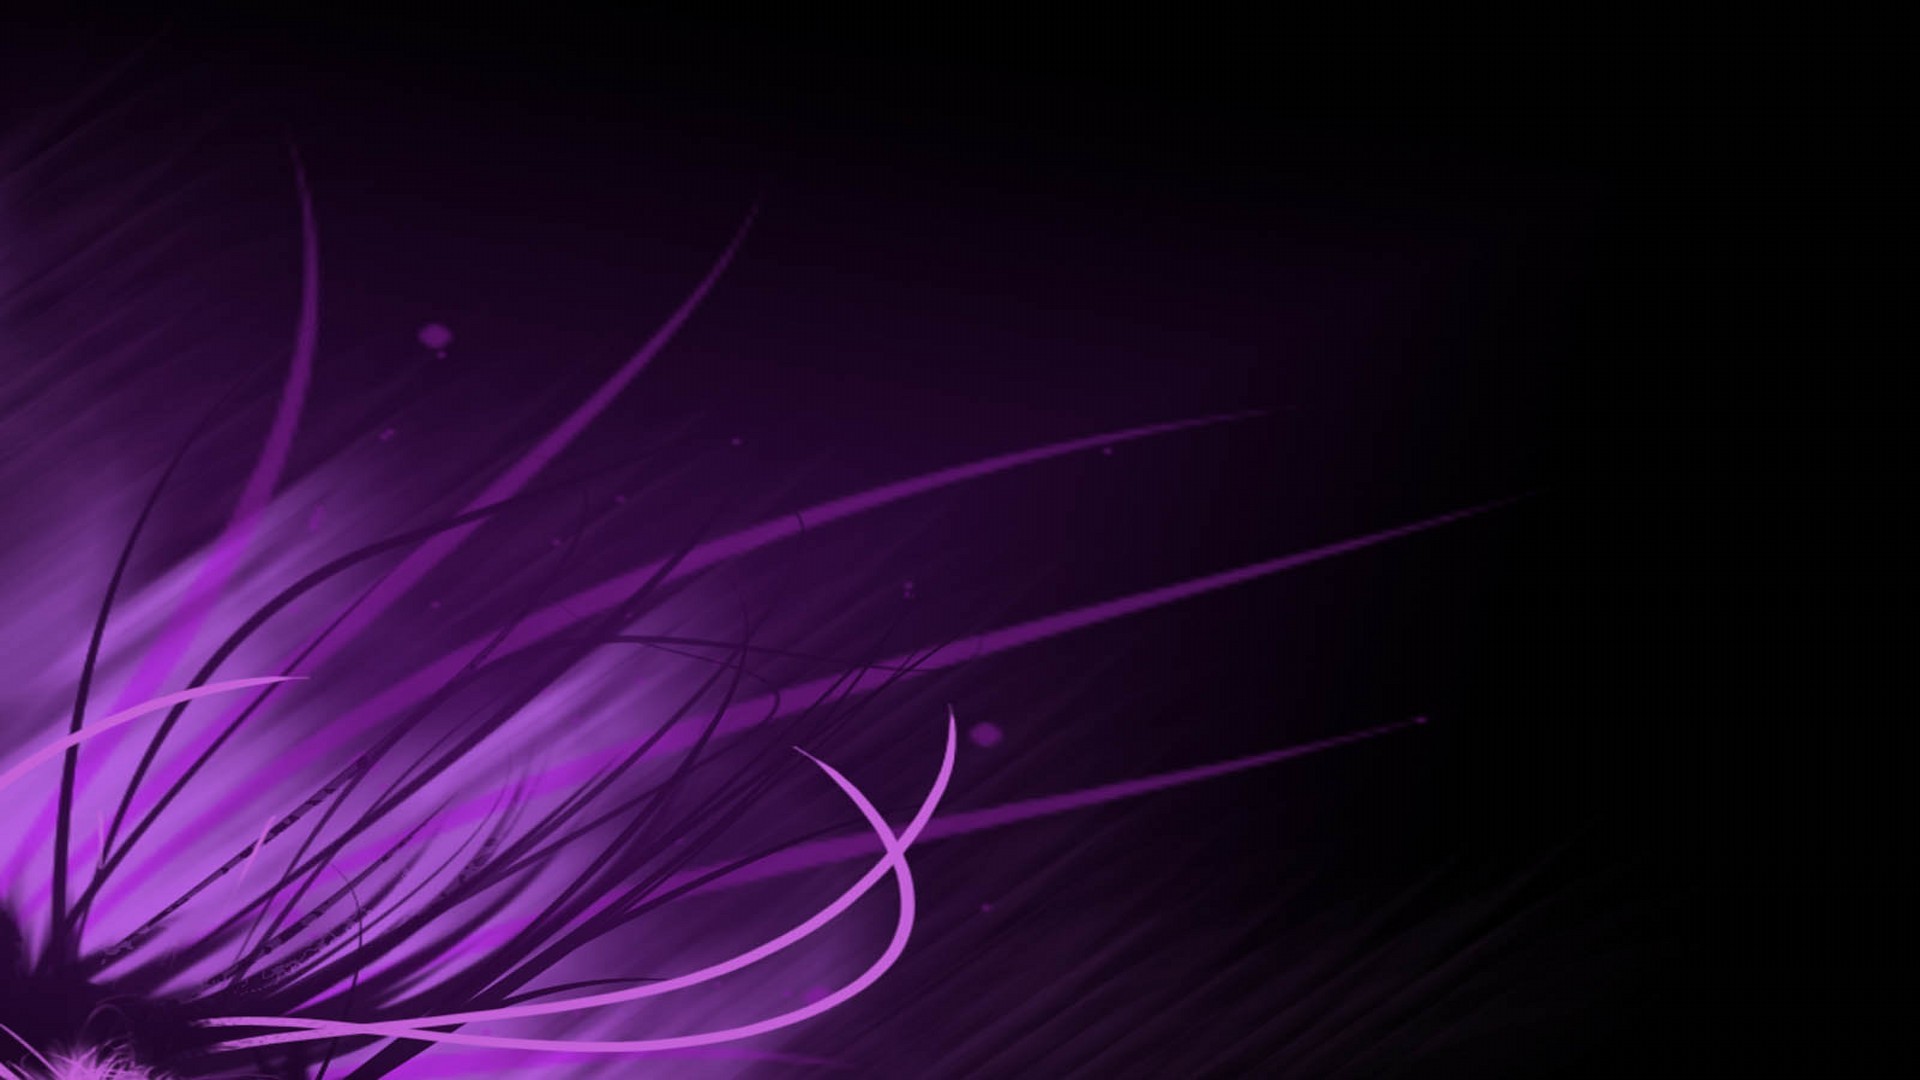 1920x1080 Hd Wallpaper Freebie Quality Free Download Wallpapers Design Purple  Background Images